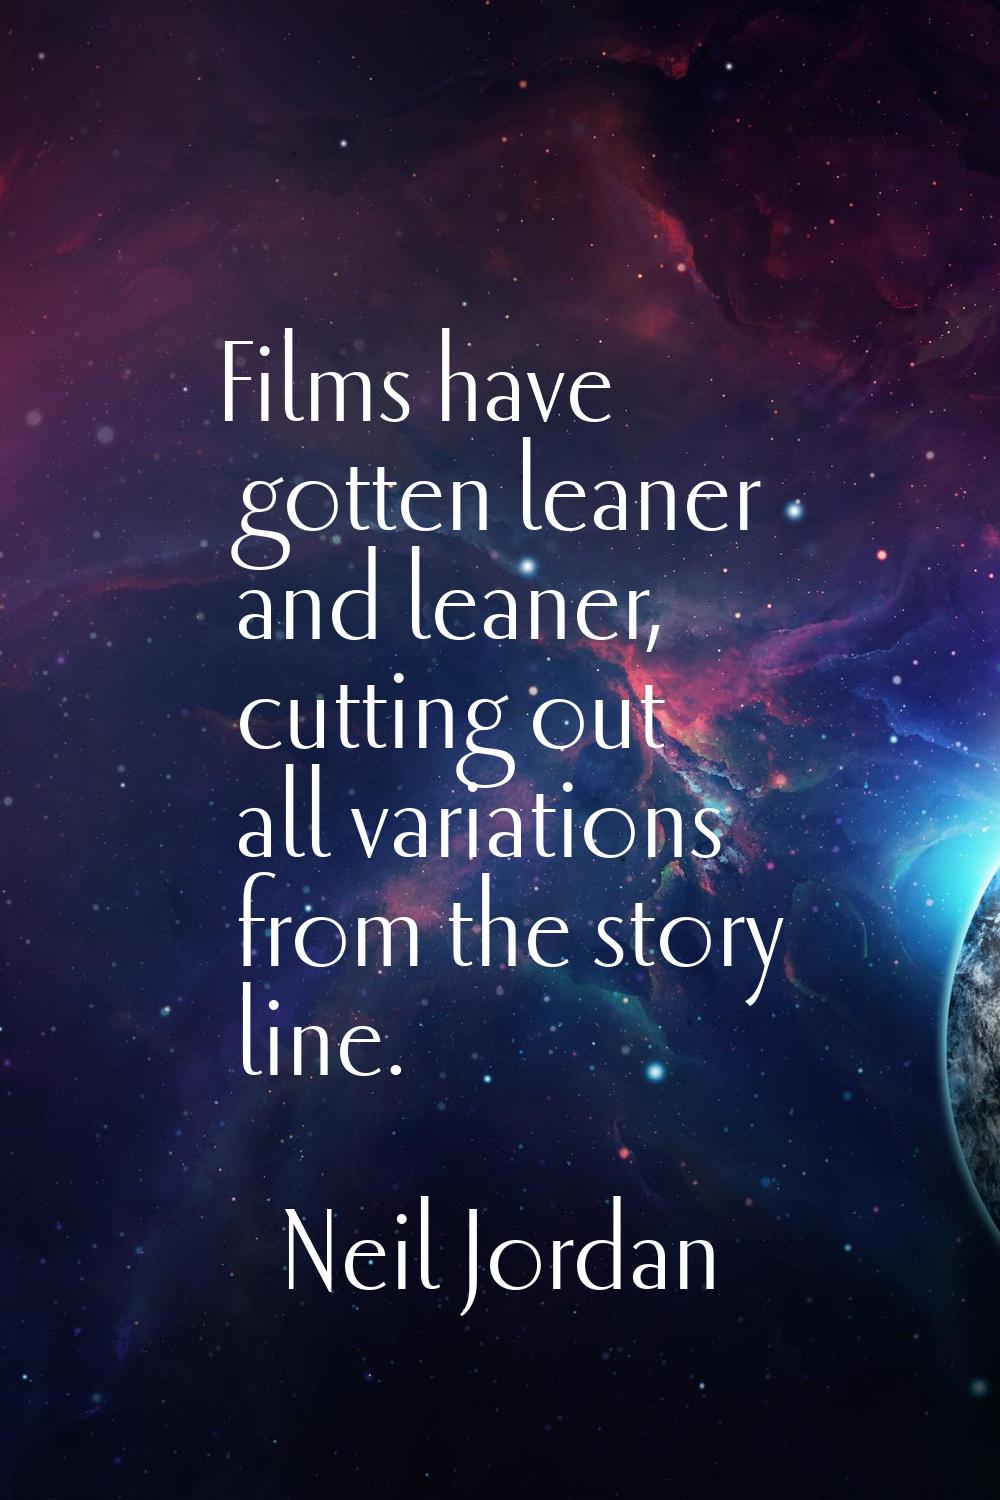 Films have gotten leaner and leaner, cutting out all variations from the story line.